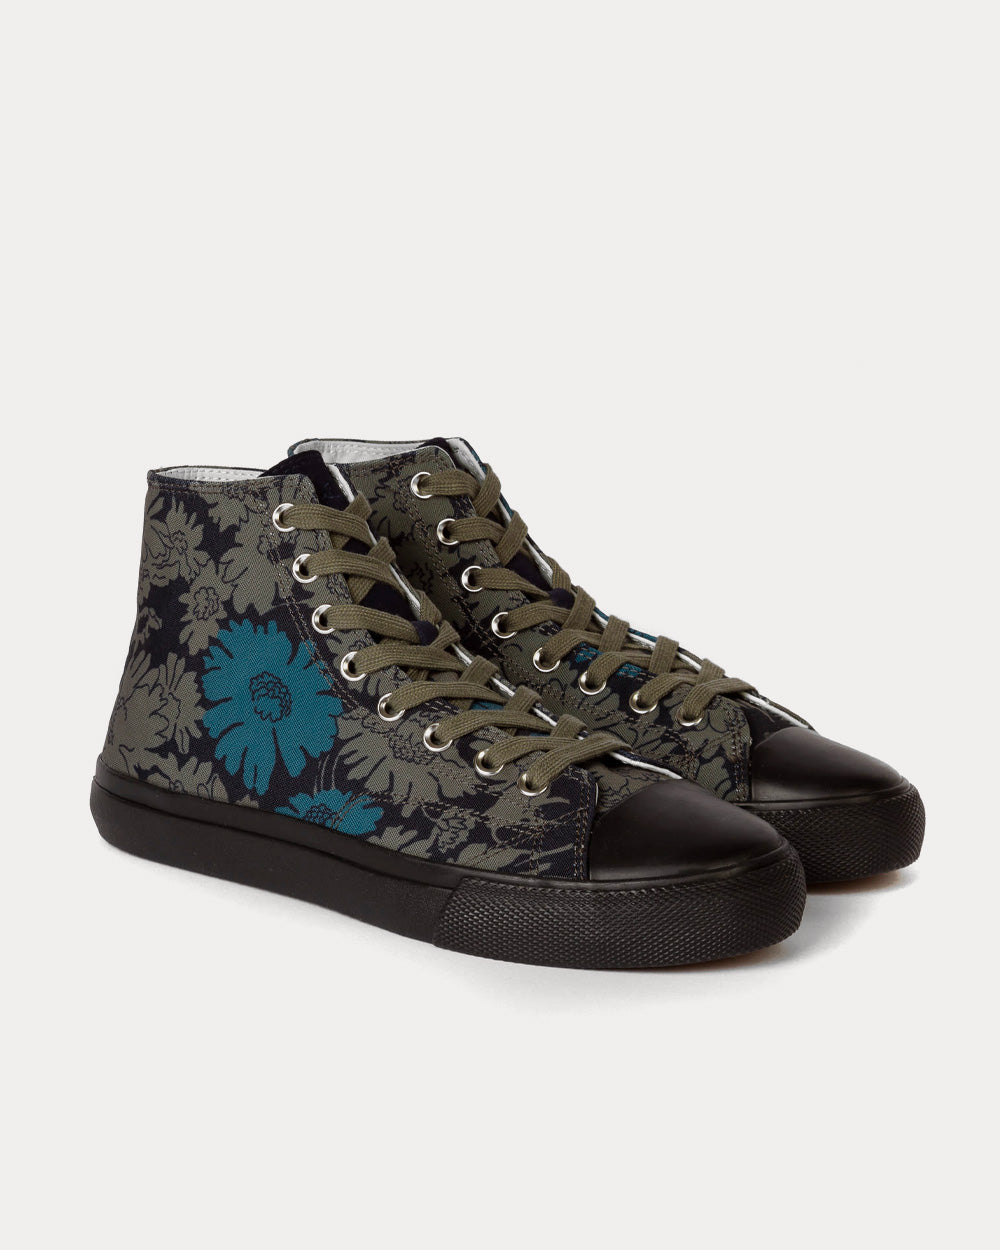 Paul Smith - Carver Archive Floral Green High Top Sneakers